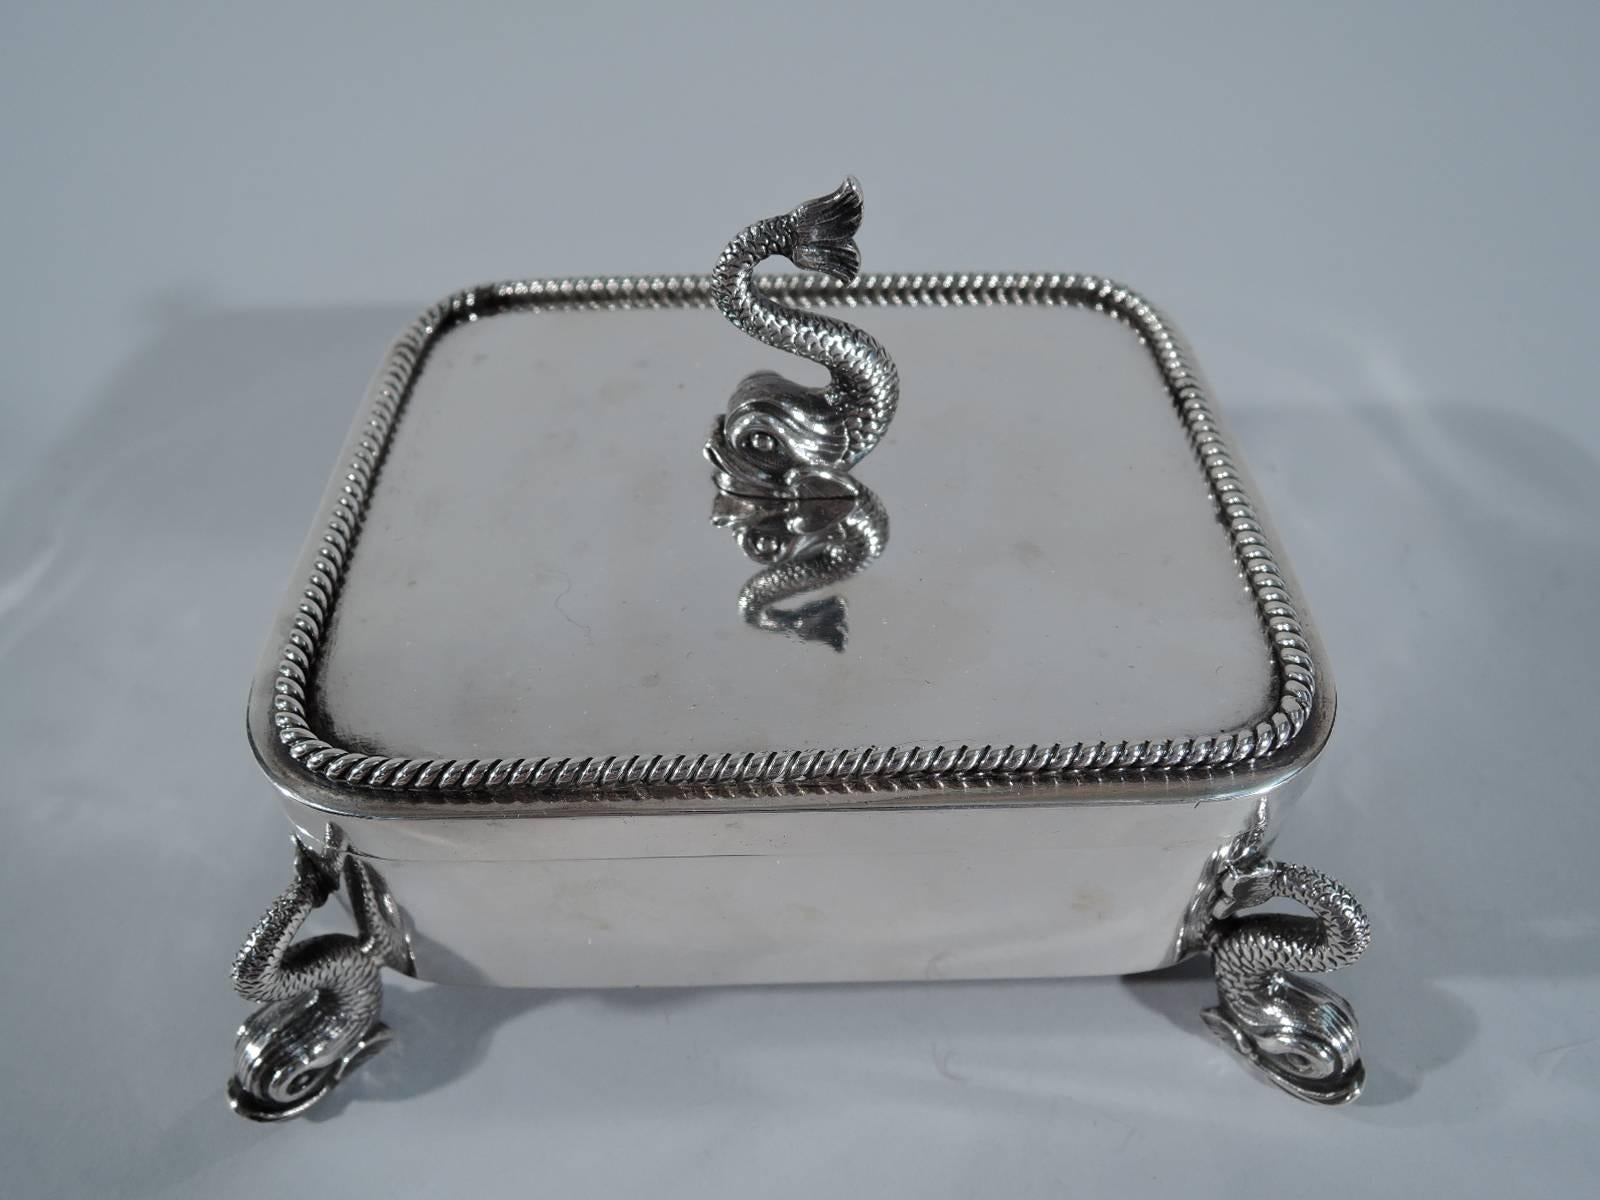 Rare sterling silver desk box. Made by Tiffany & Co. in New York, circa 1865. Rectangular with straight sides and curved corners. Flat cover with applied cable border. Corner supports and finial in form of cast dolphin figures. A restrained design